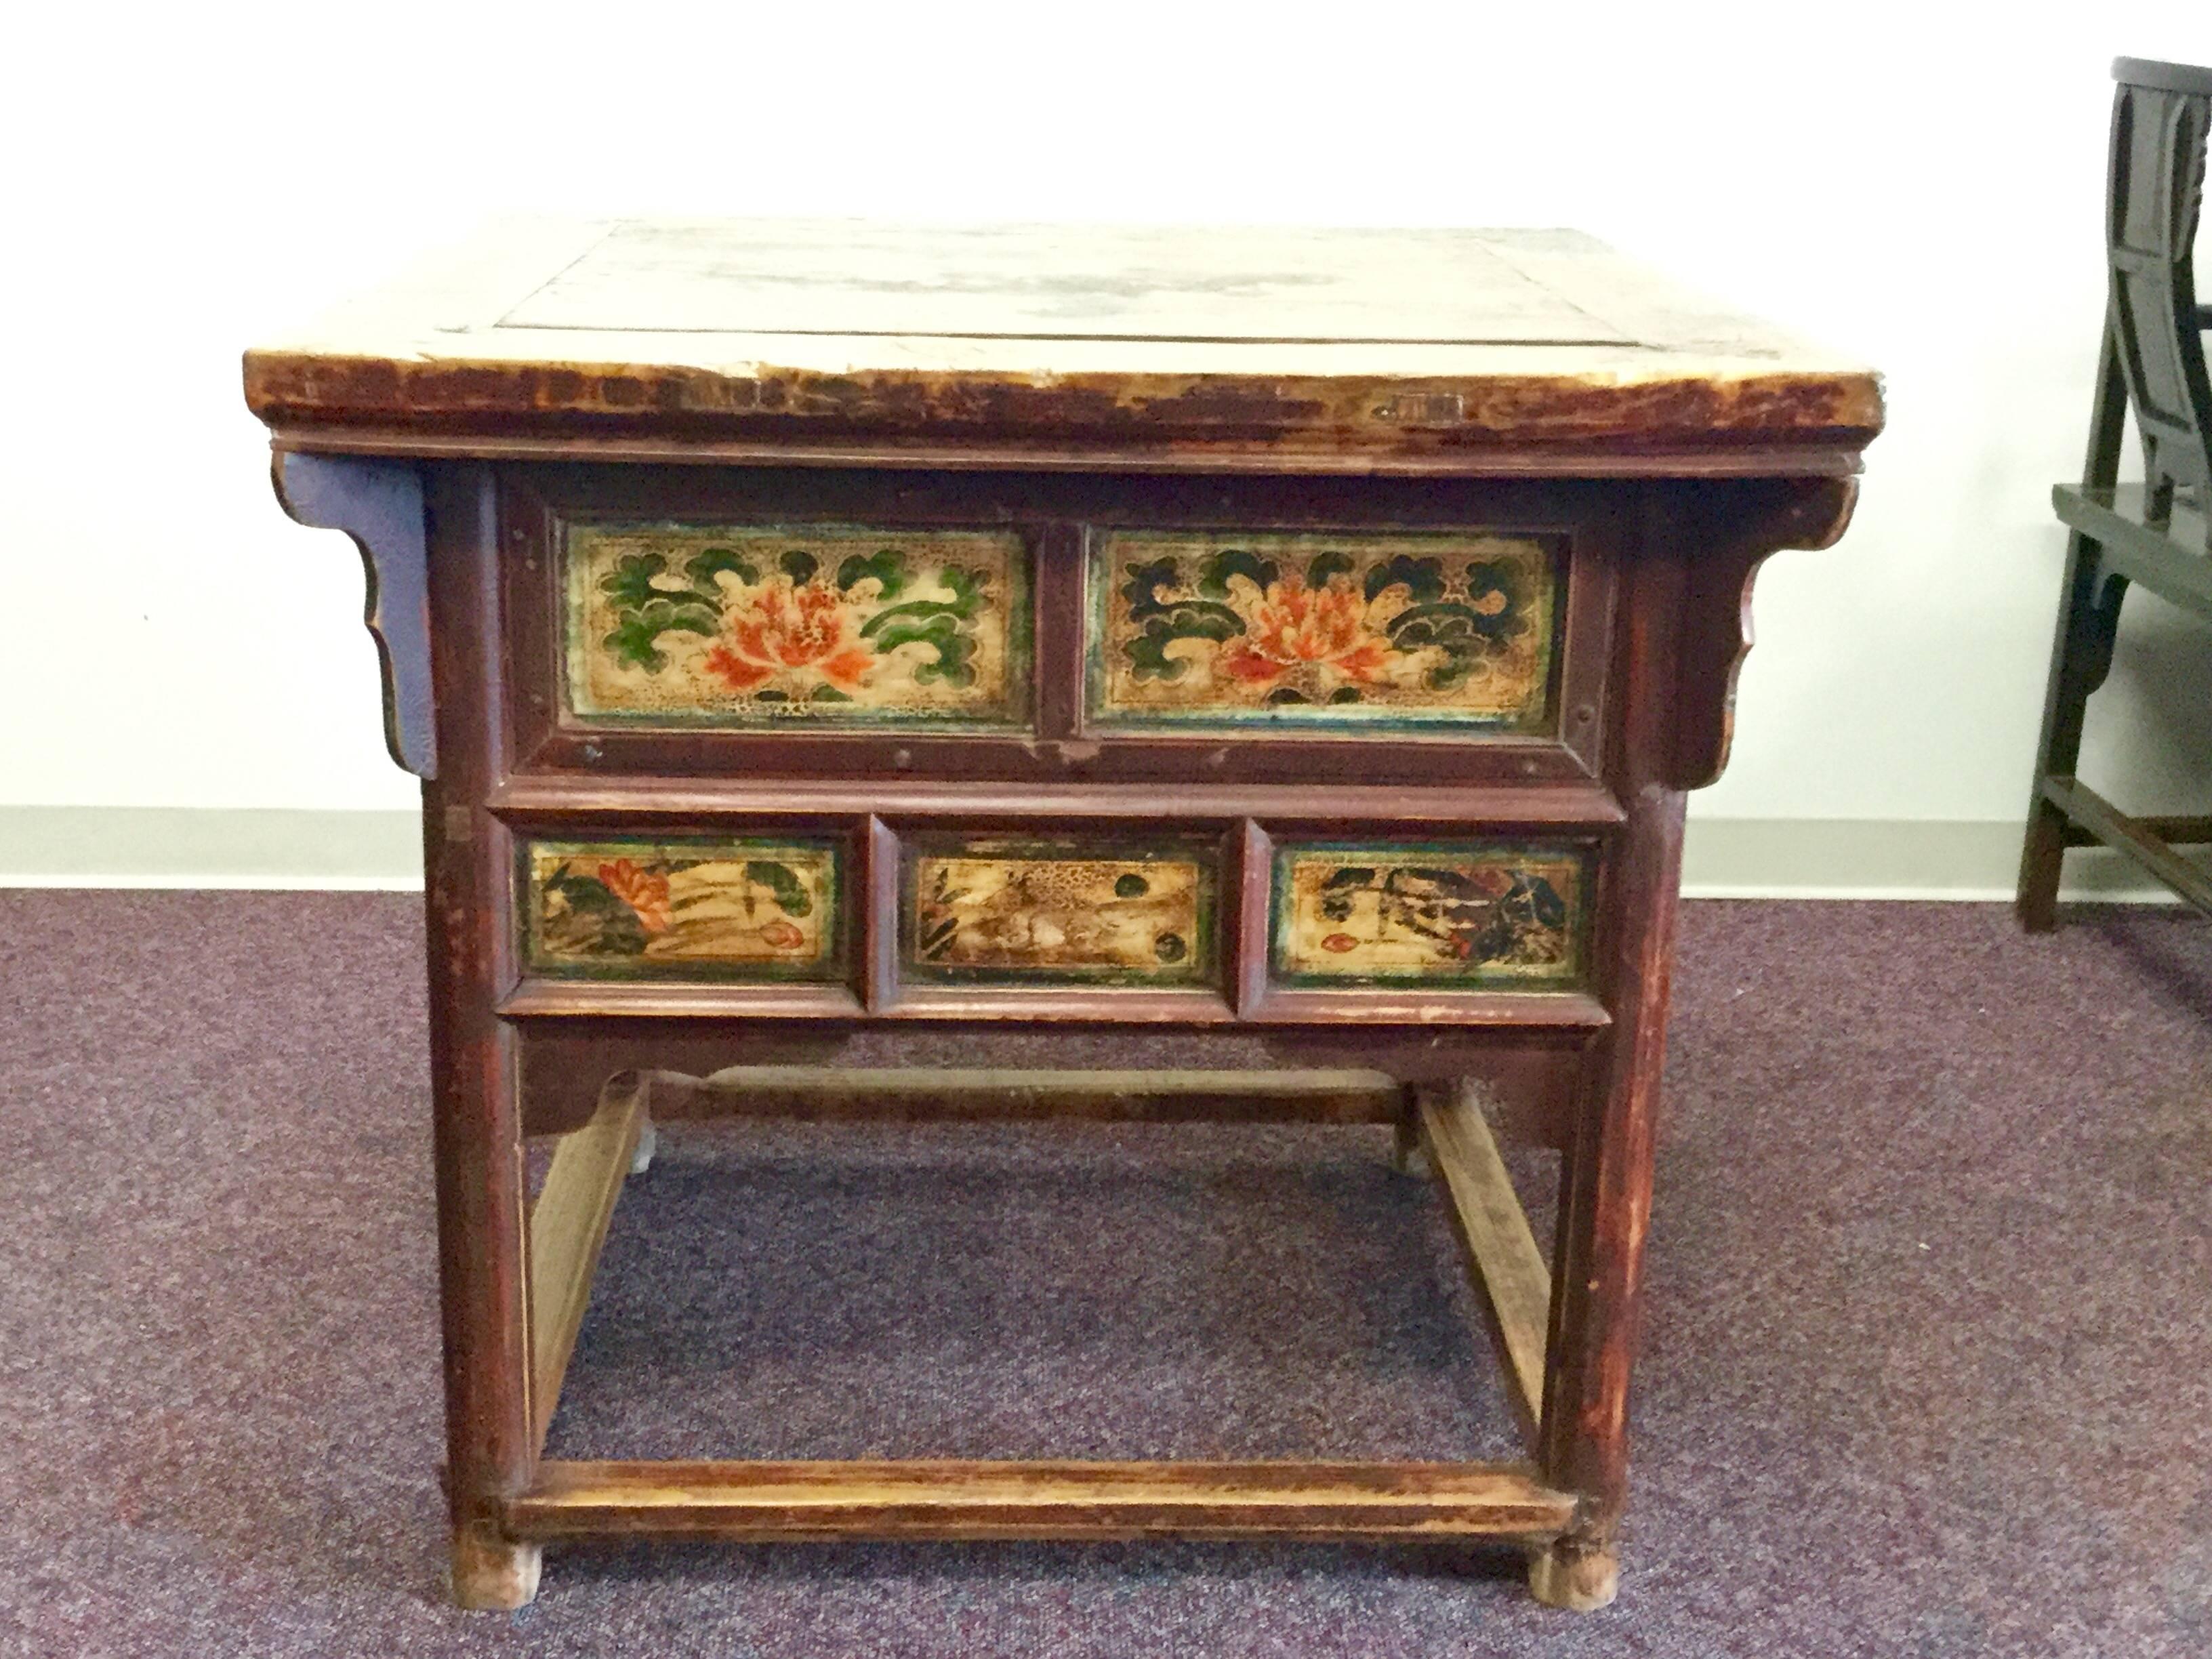 19th Century Chinese Square Kitchen Table, Walnut, Hand-Painted, Lotus Motif In Good Condition For Sale In Santa Fe, NM